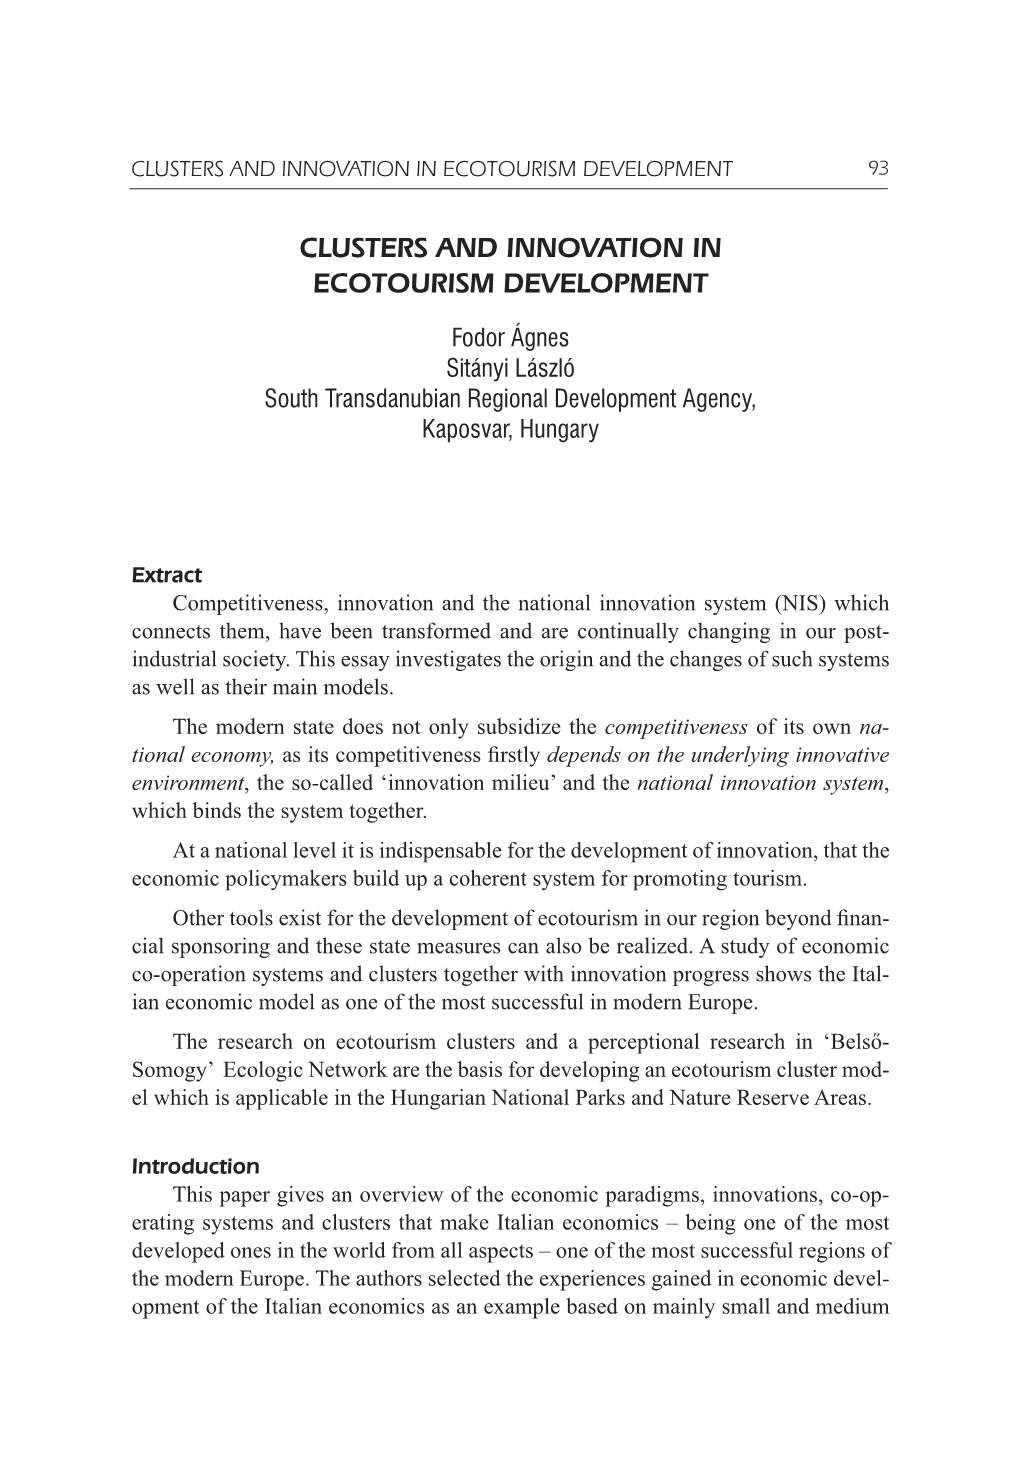 Clusters and Innovation in Ecotourism Development 93